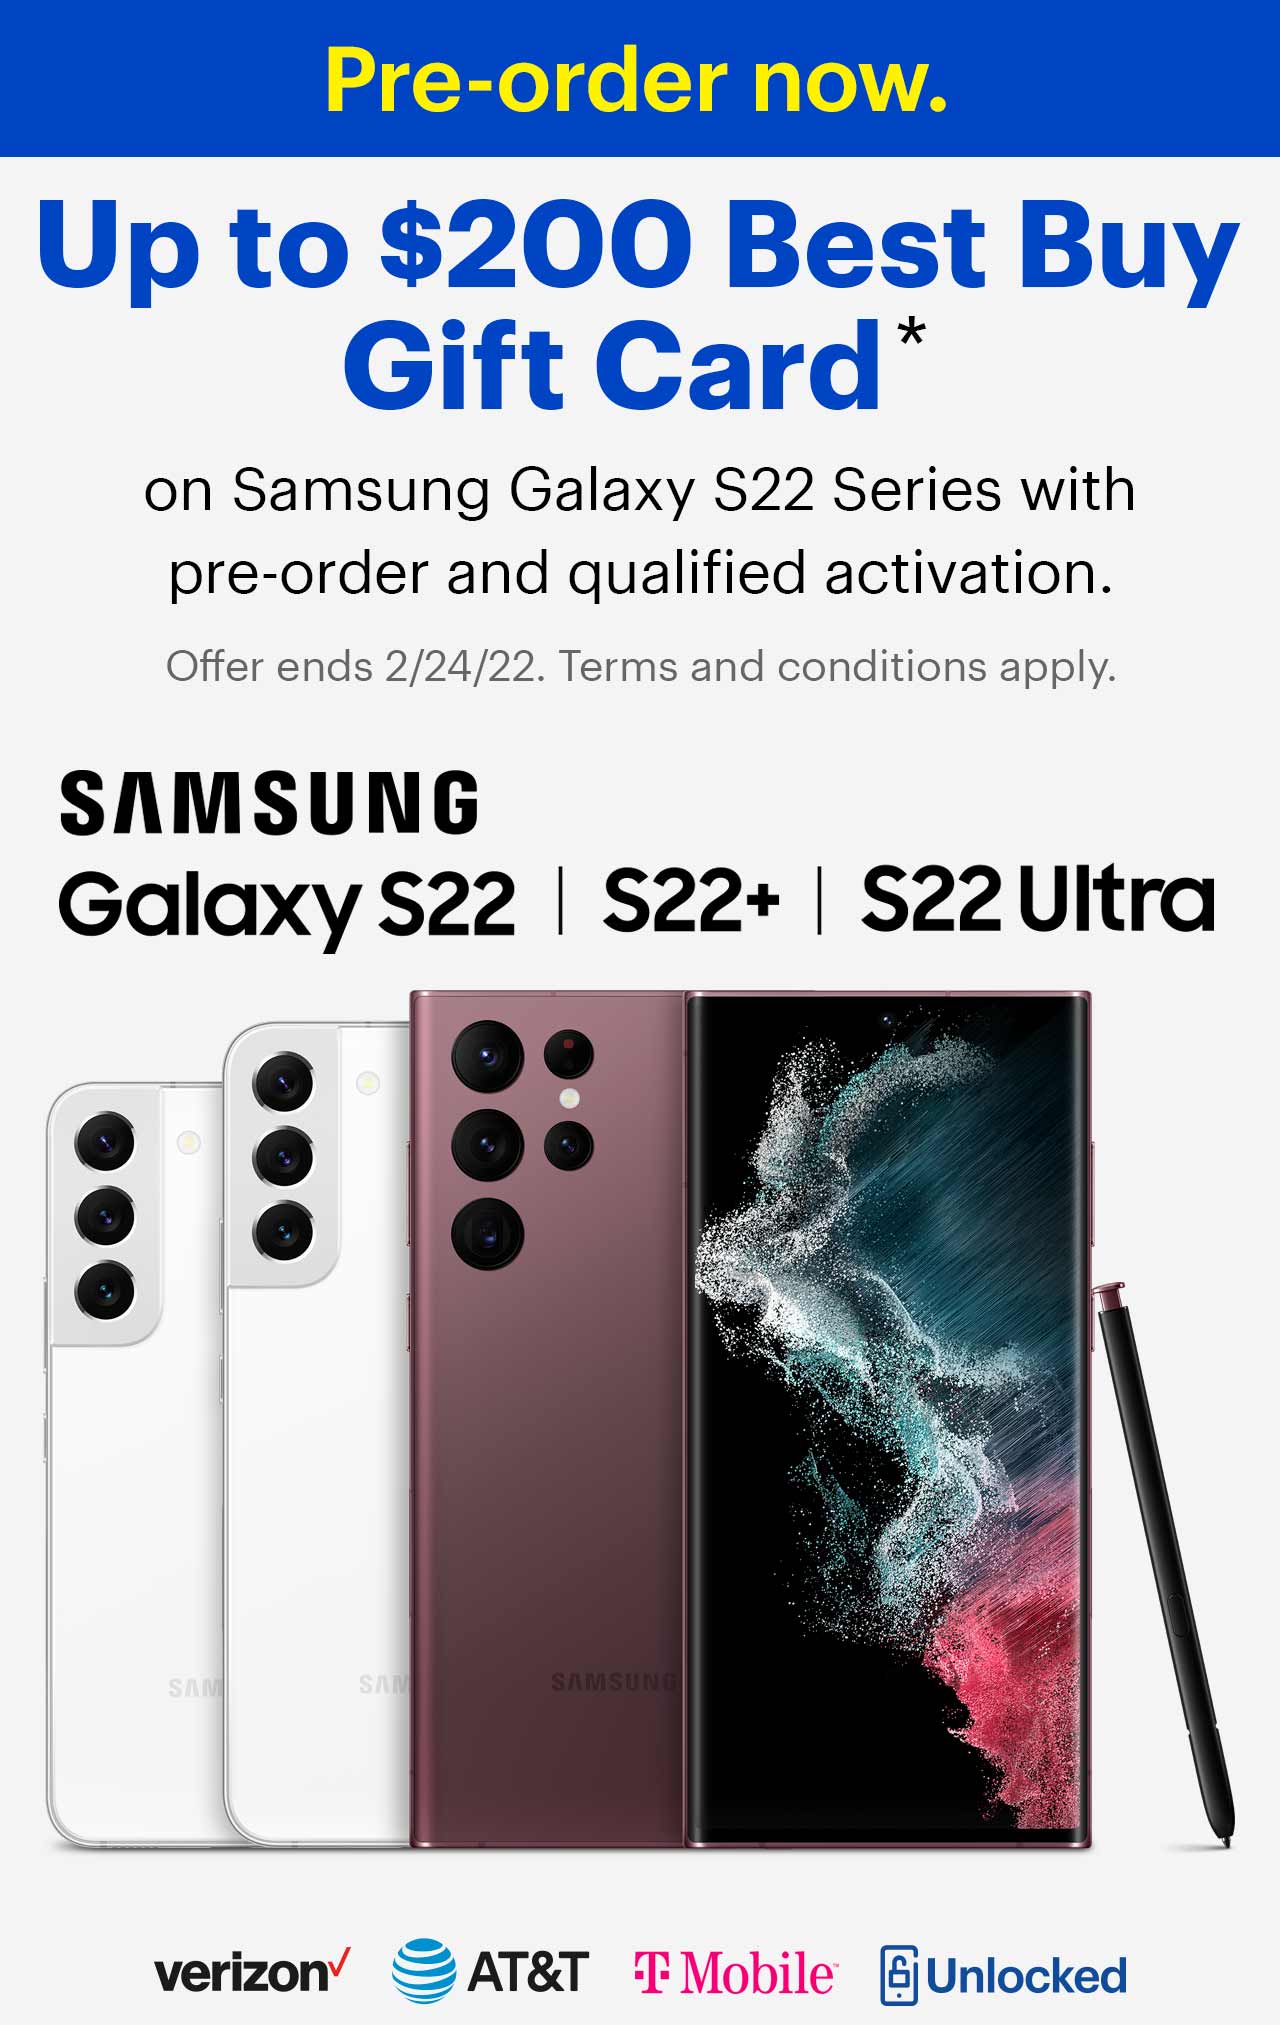 Pre-order now. Up to $200 Best Buy Gift Card on Samsung Galaxy S22 Series with pre-order and qualified activation. Offer ends 2/24/22. Terms and conditions apply. Samsung, Verizon, A T and T, t mobile, unlocked.